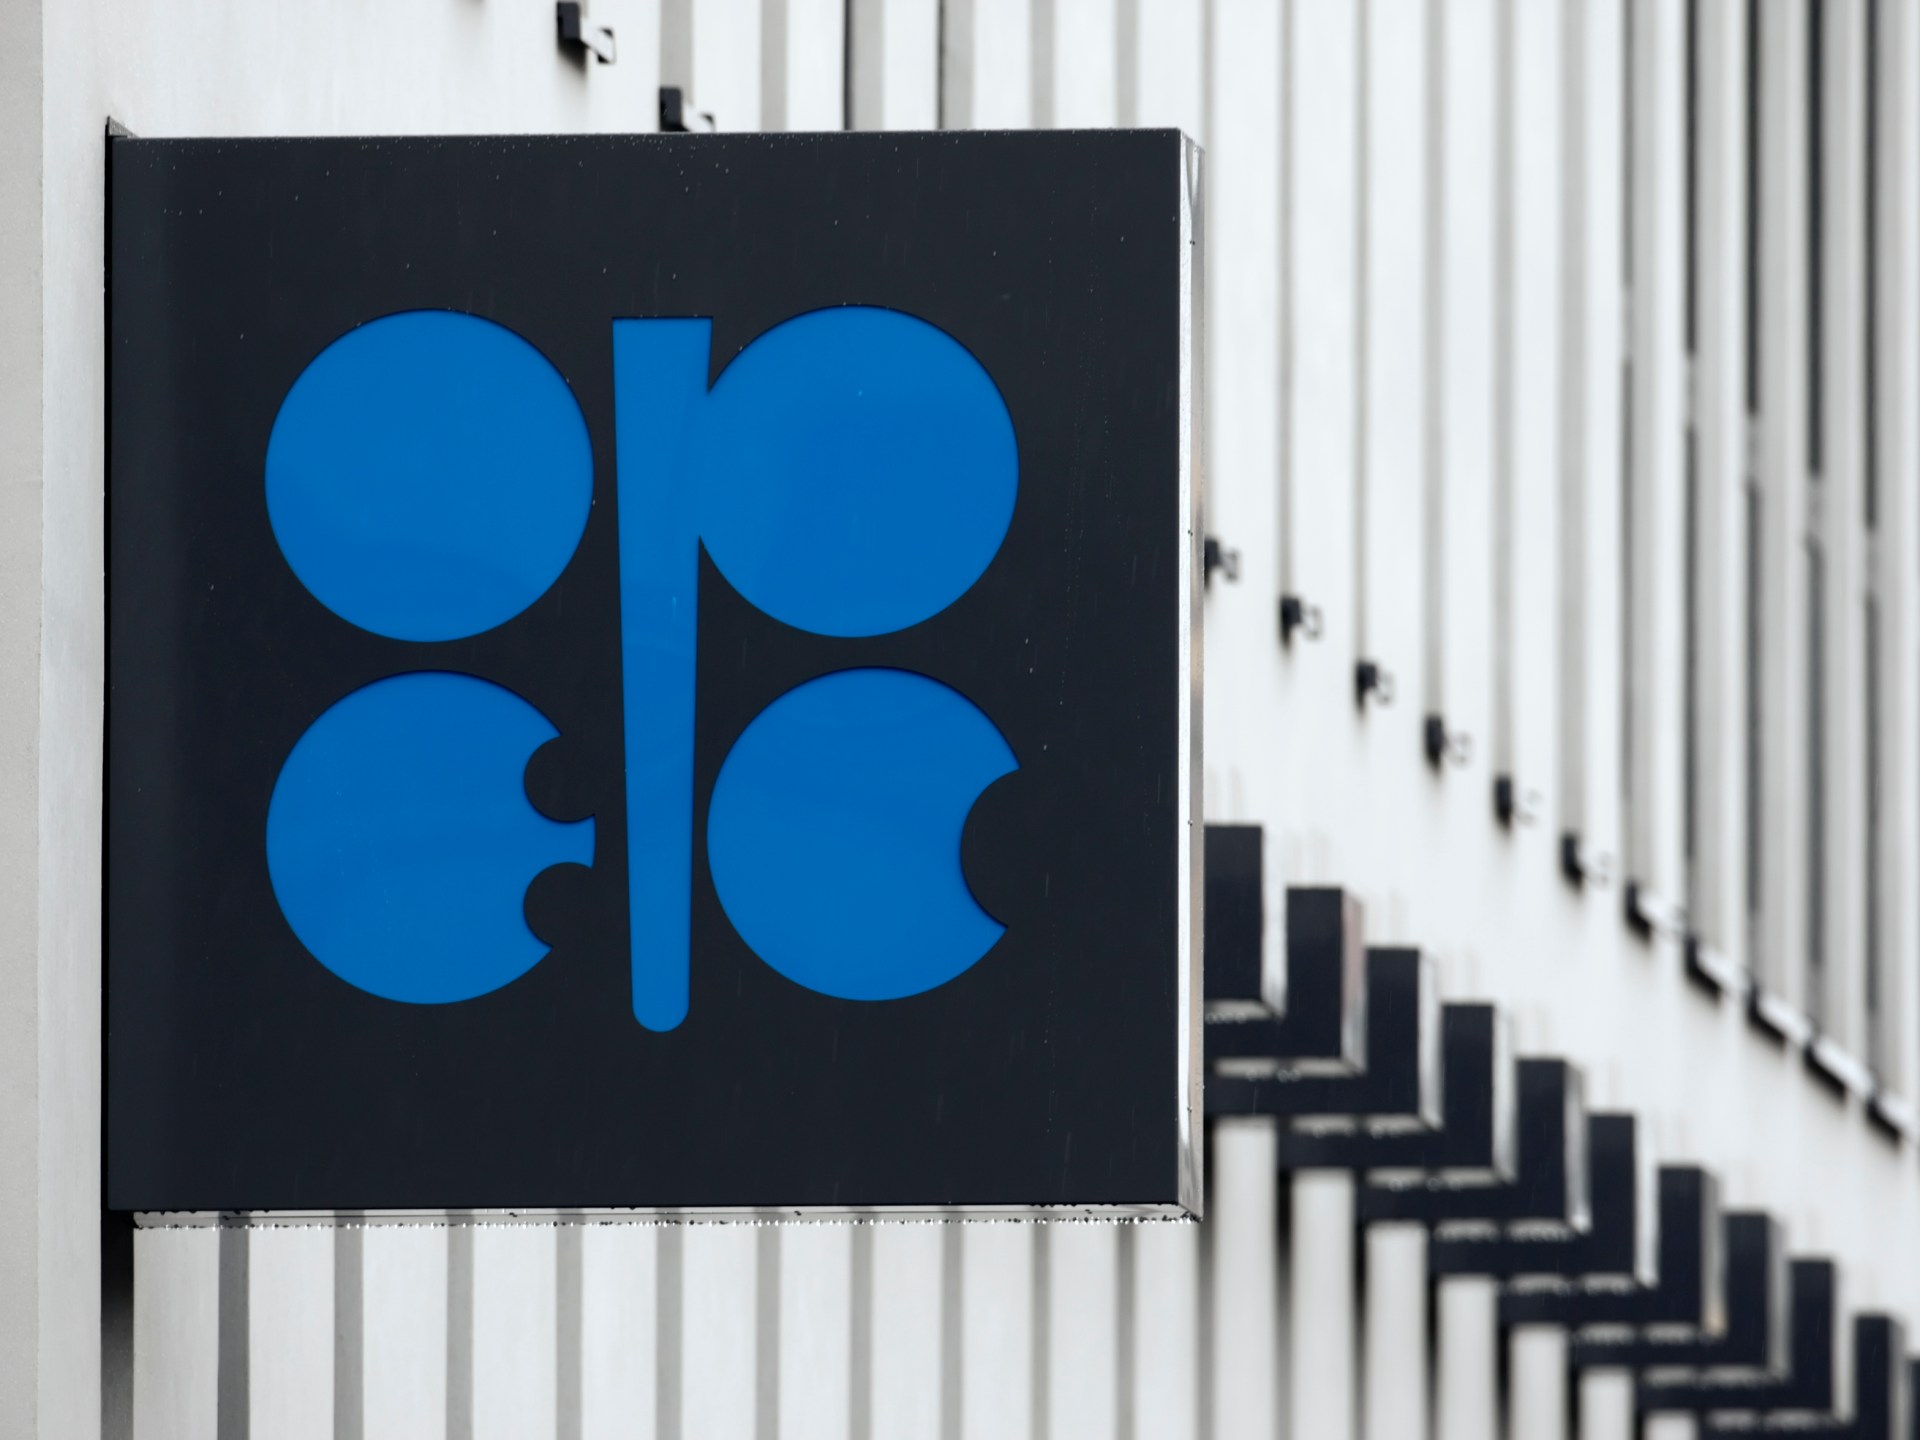 ‘OPEC doesn’t management the value’: OPEC President